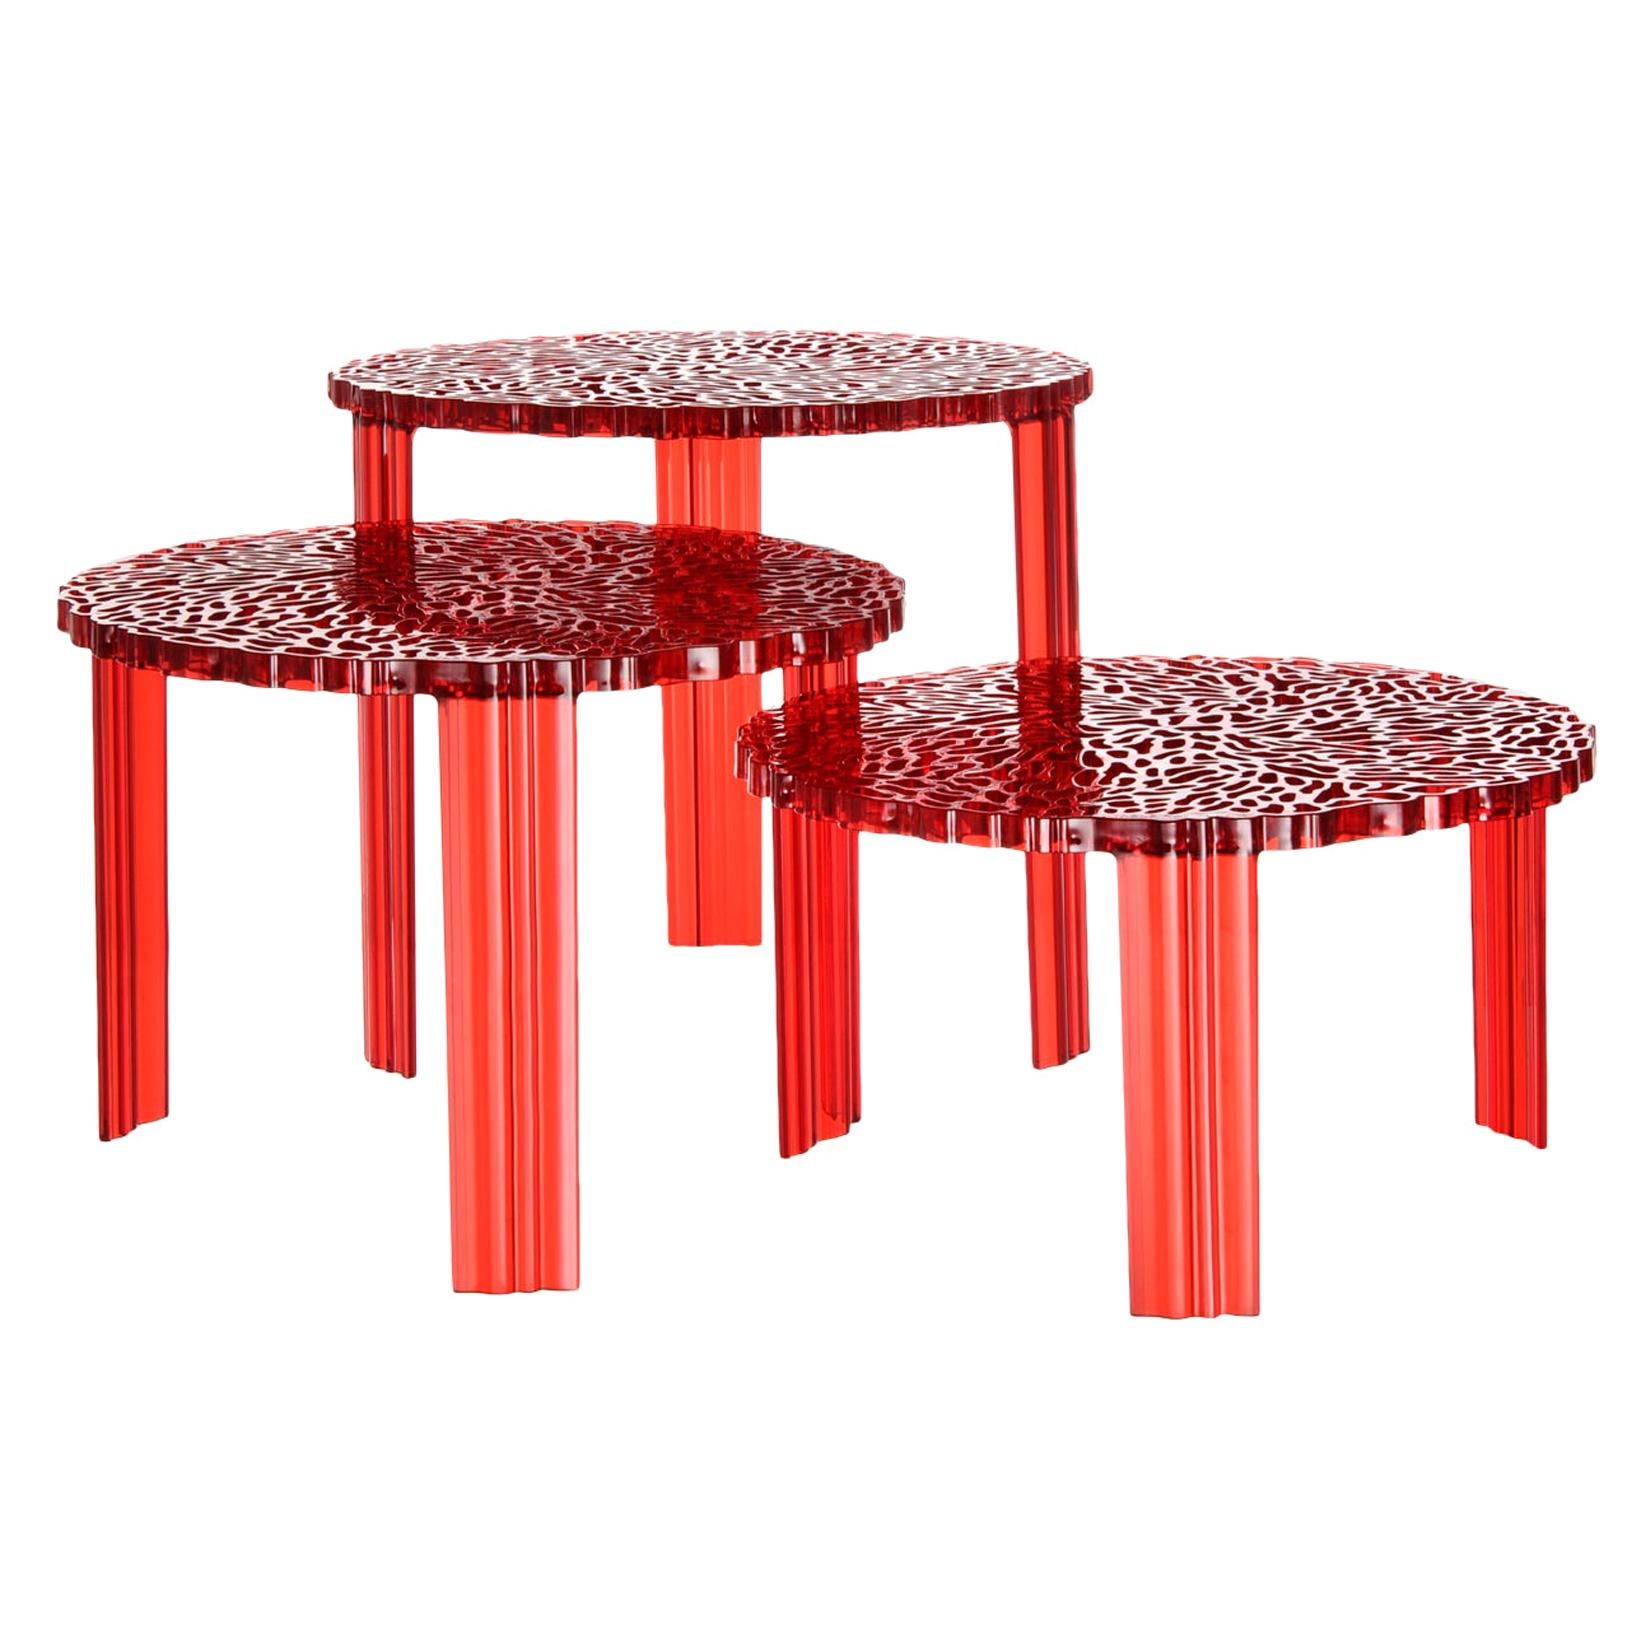 Large Altay Table by Patricia Urquiola for sale at Pamono